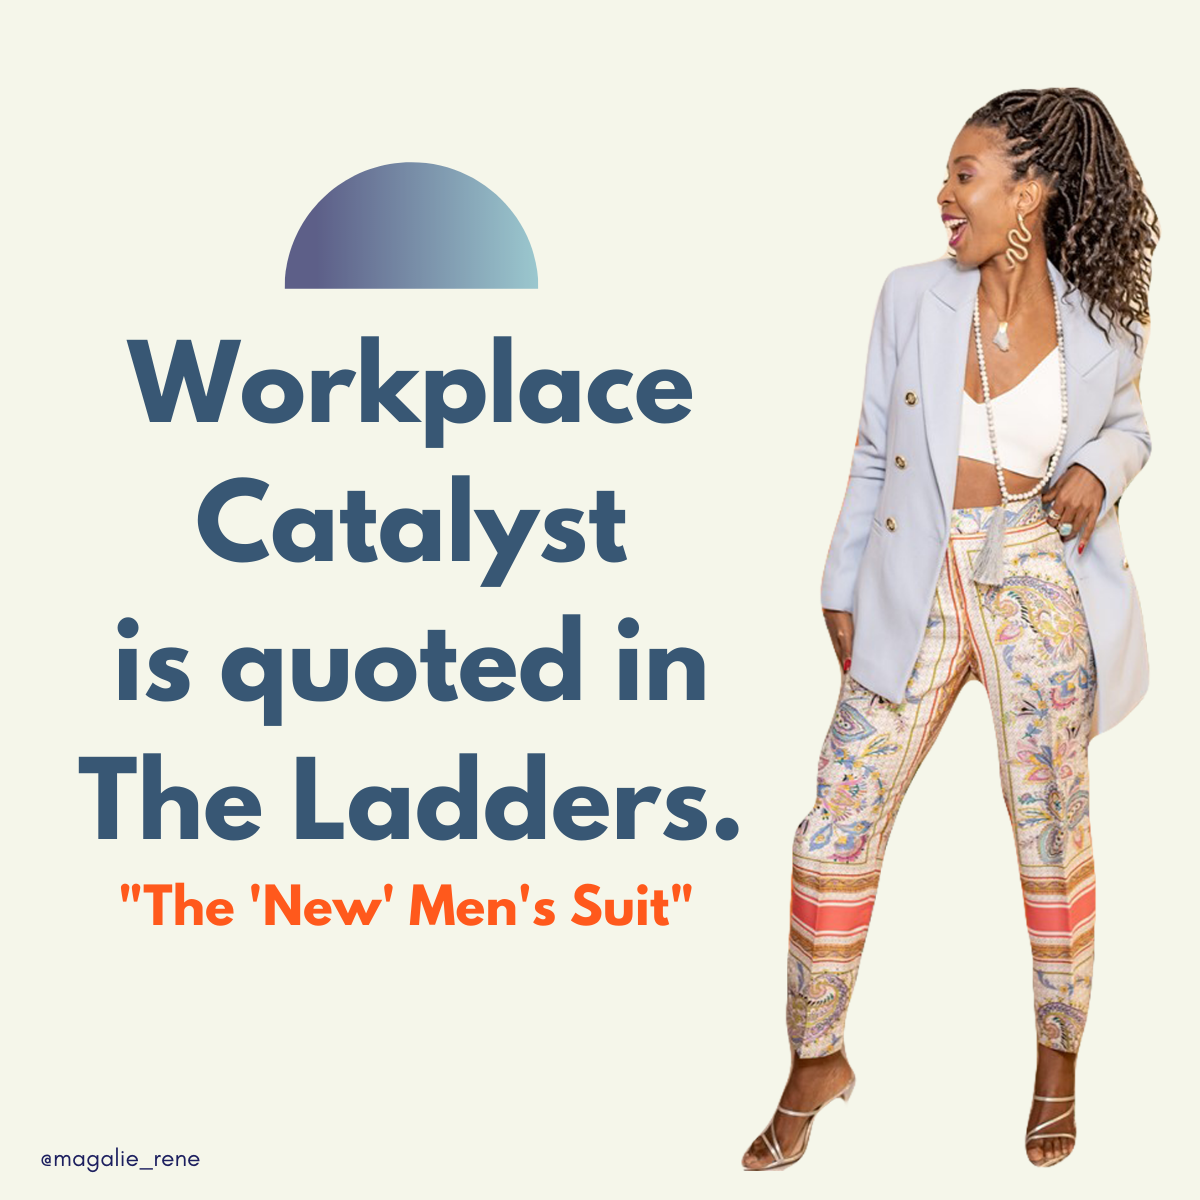 The Ladders - The New Men's Suit